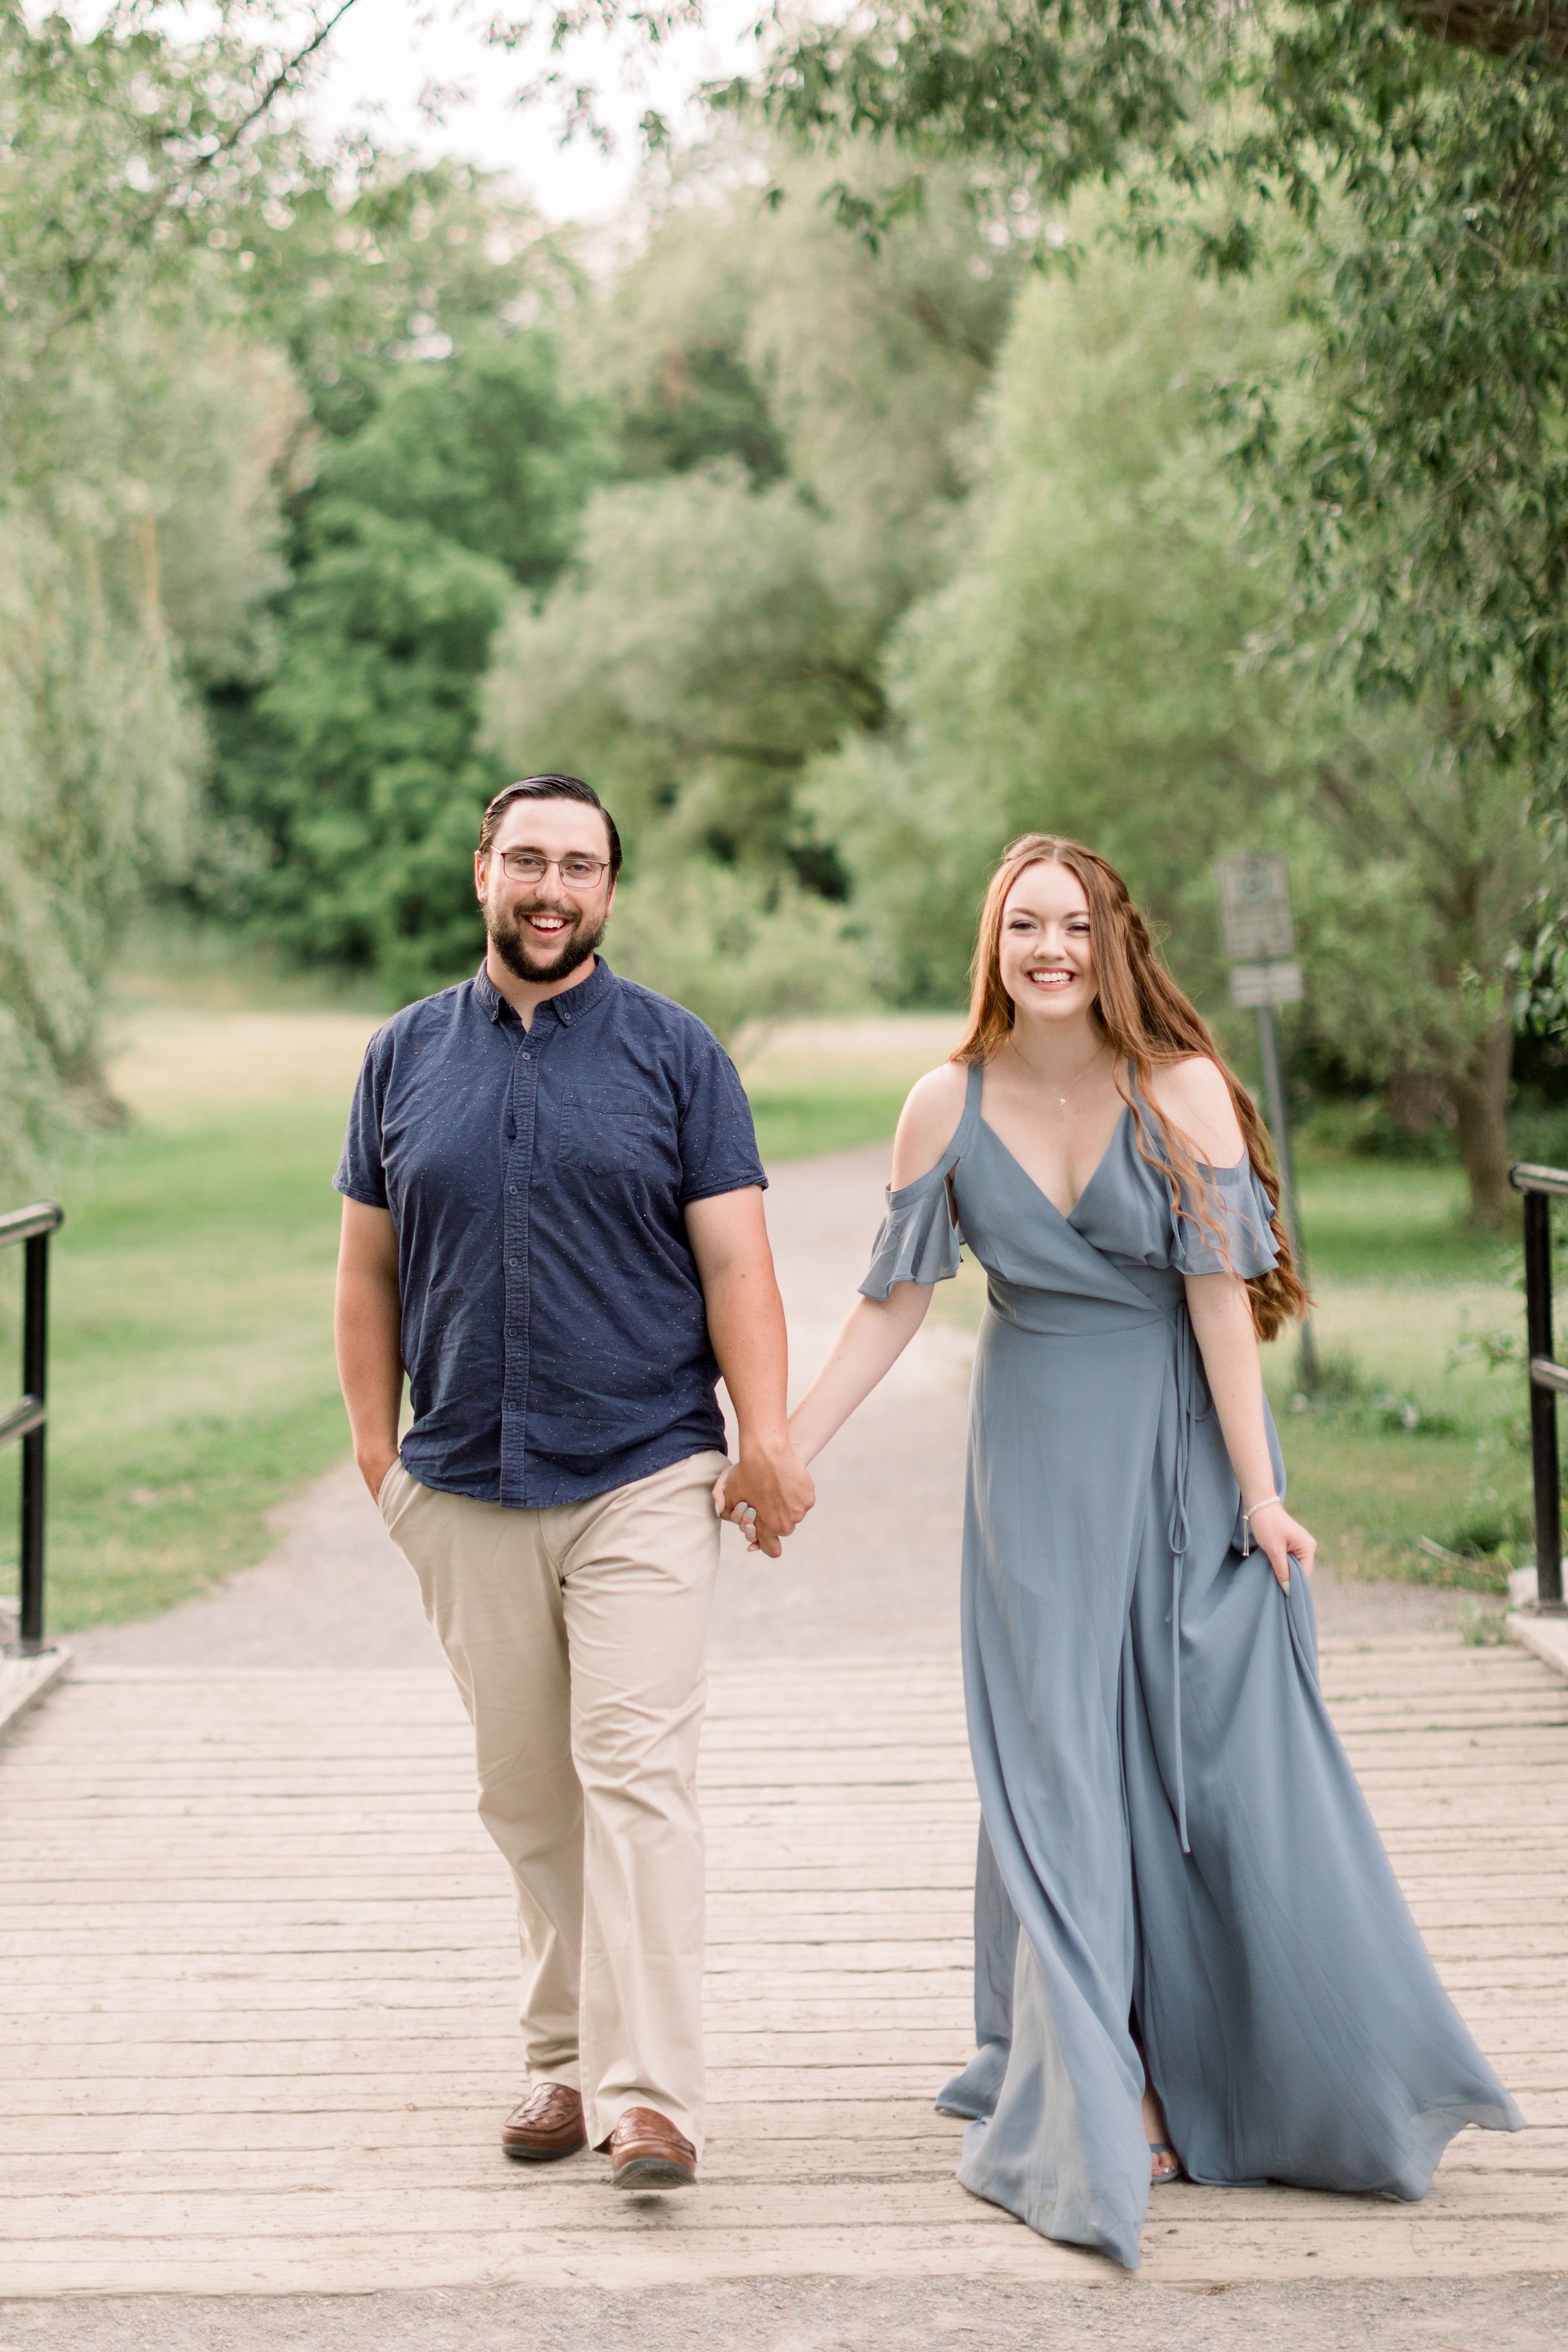  Wedding announcement portrait of a couple wearing blue at Dominion Arboretum in Ottawa by Chelsea Mason Photography. engagement portrait #chelseamasonphotography #chelseamasonengagements #Ottawaengagements #DominonArboretum #Ottawaphotographers&nbsp